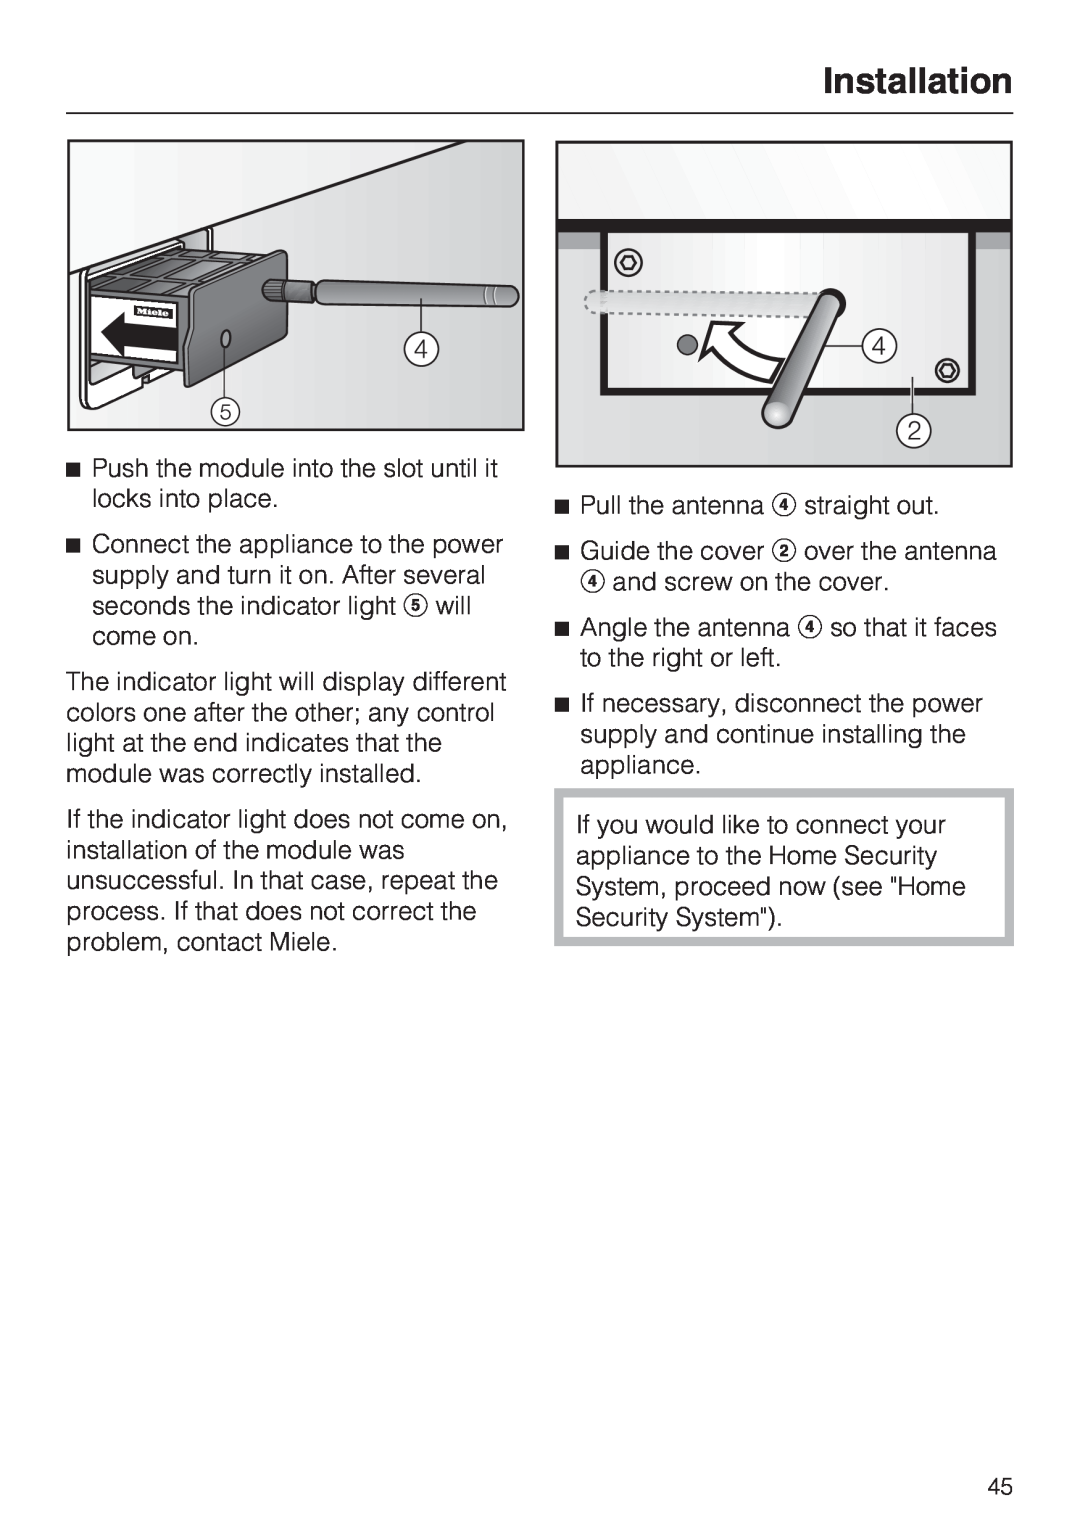 Miele KWT 1611 SF, KWT 1601 SF installation instructions Installation 